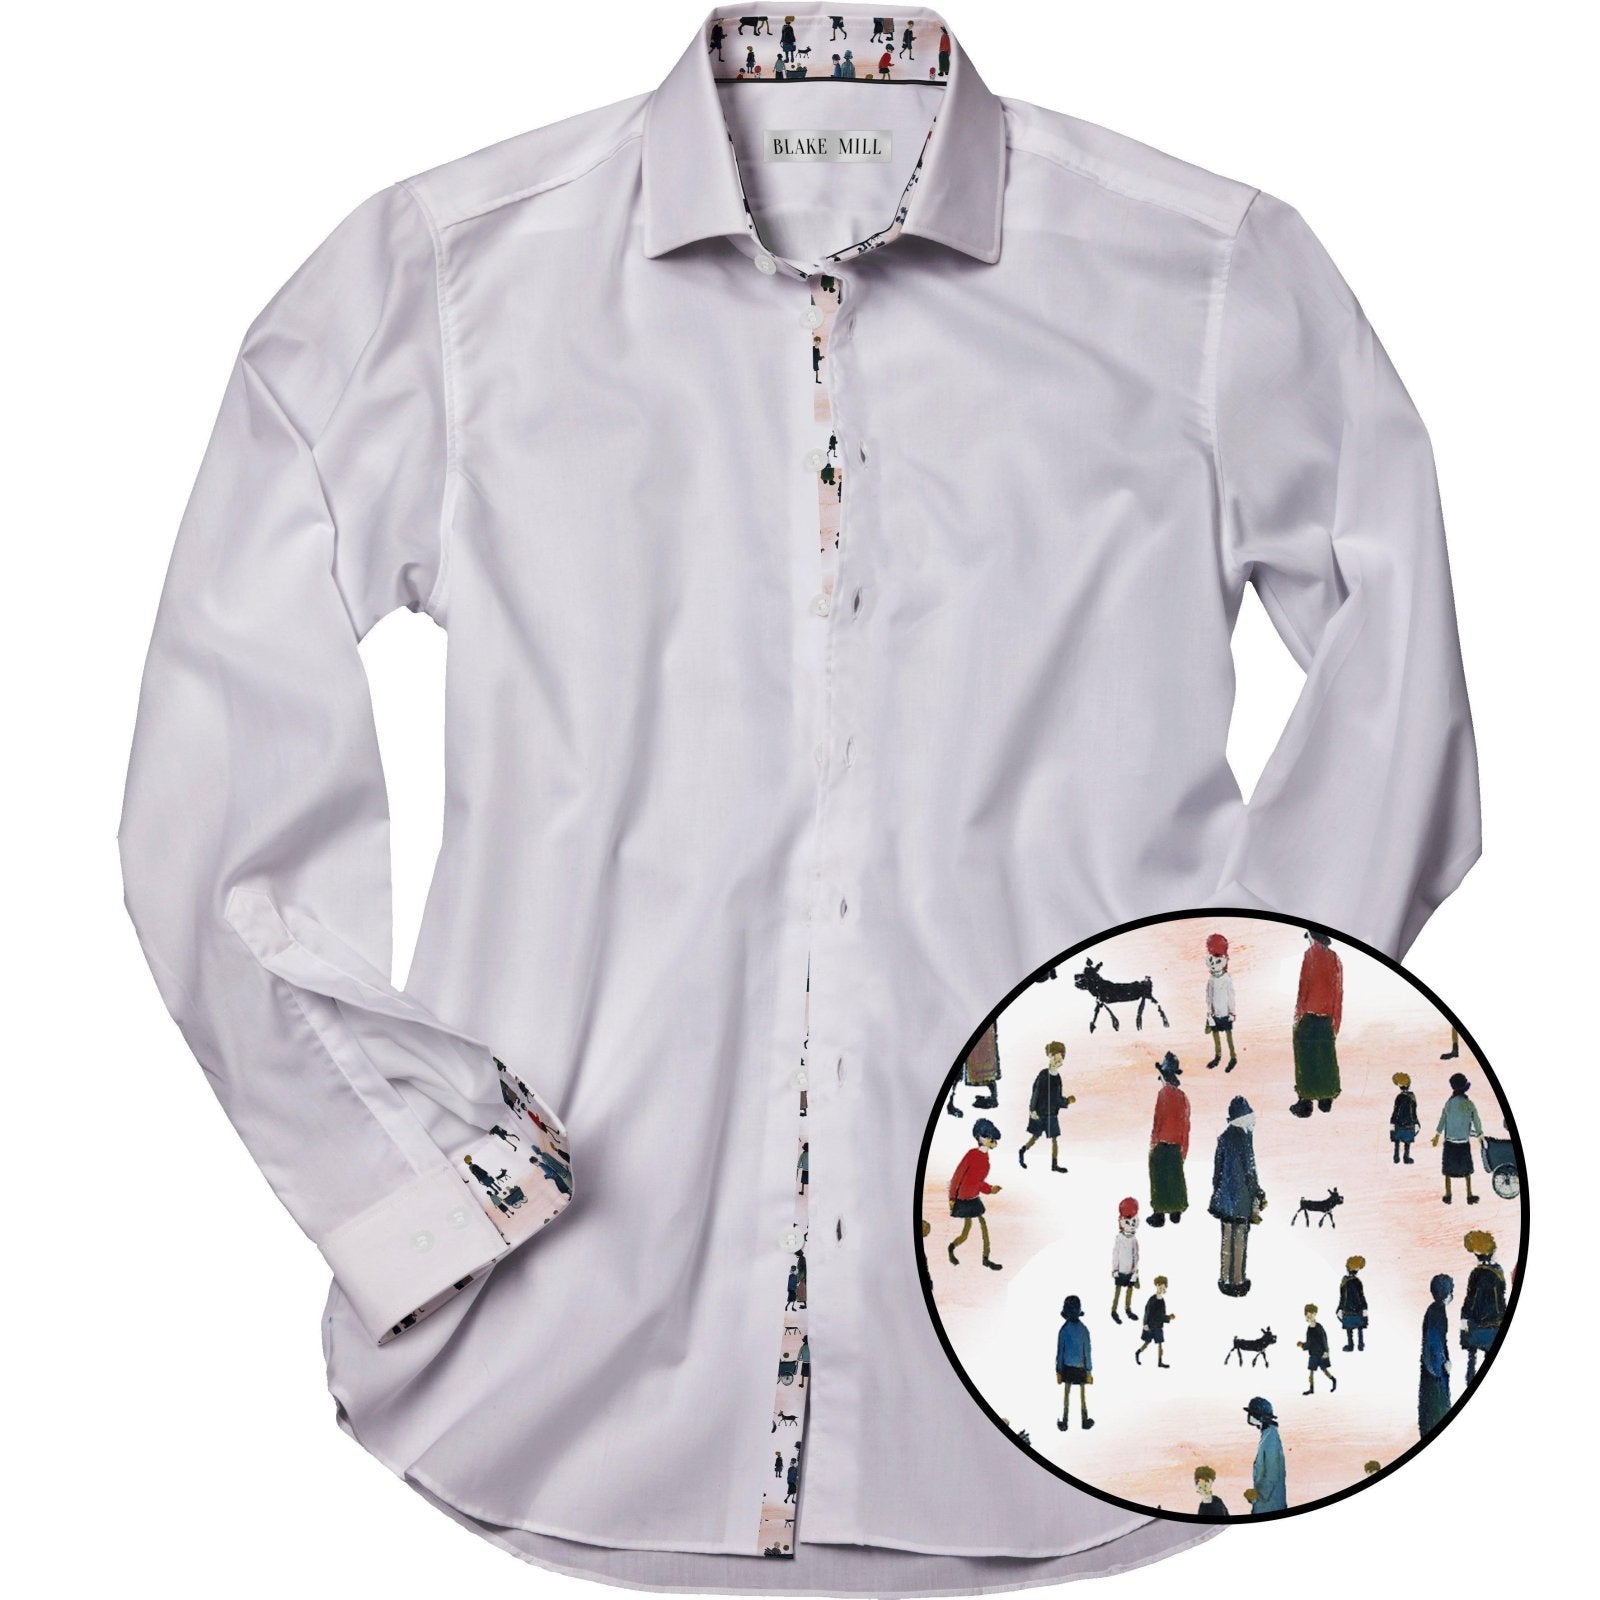 White with Lowry Accents Shirt - Blake Mill